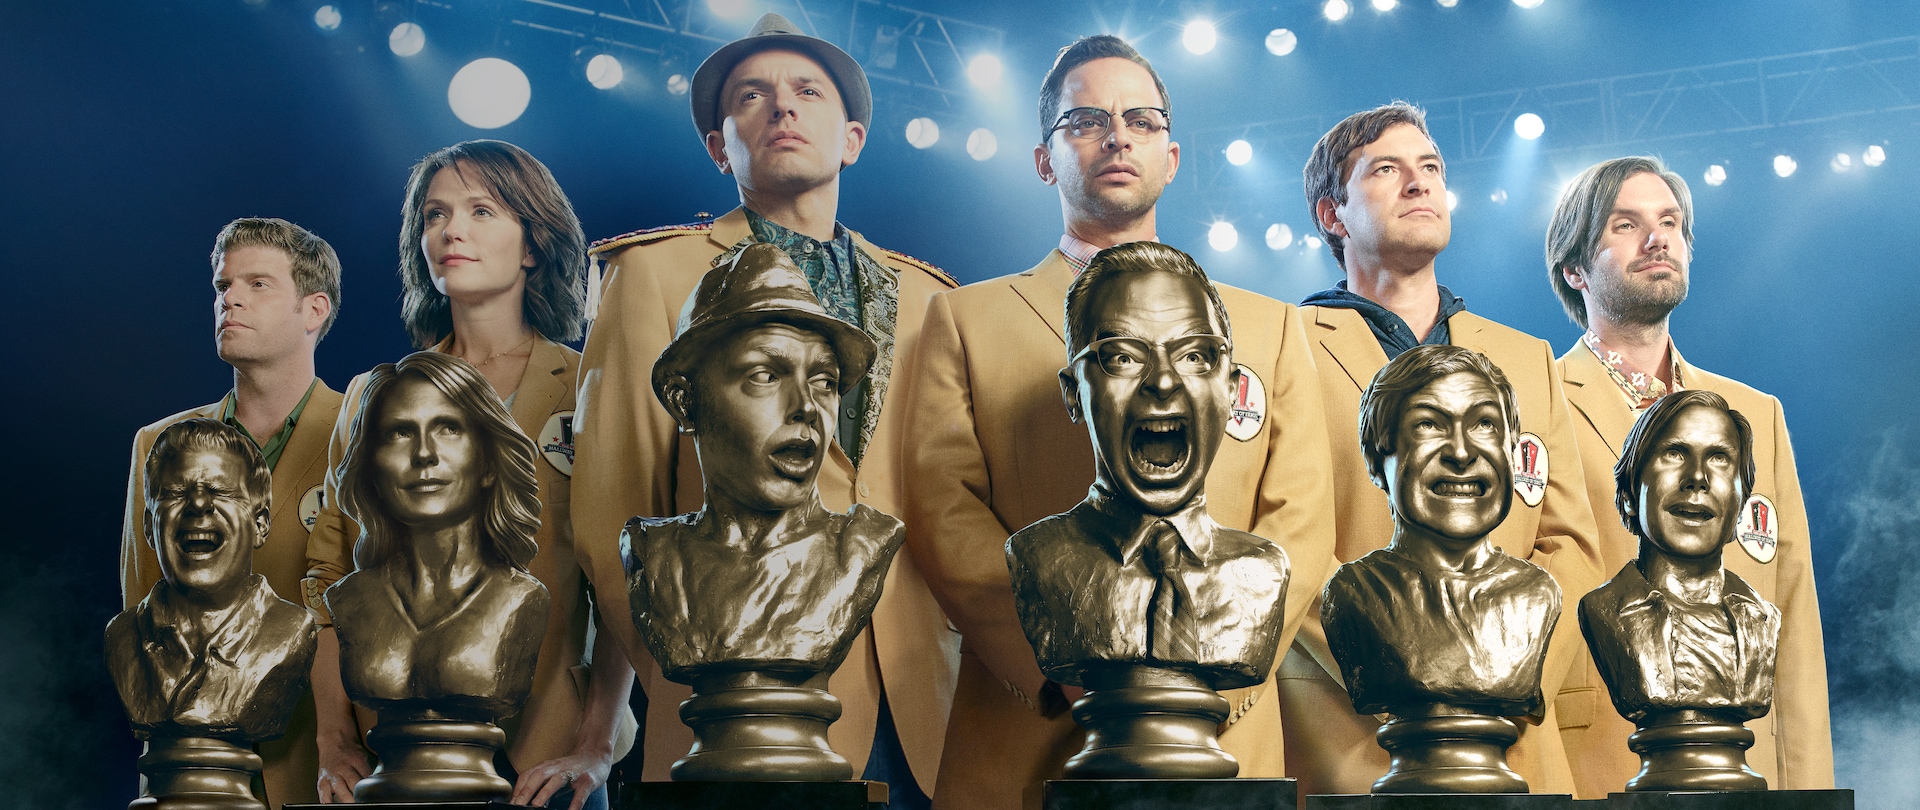 Group of friends lined on up a football field in Fantasy Football sports jackets standing behind golden busts of themselves